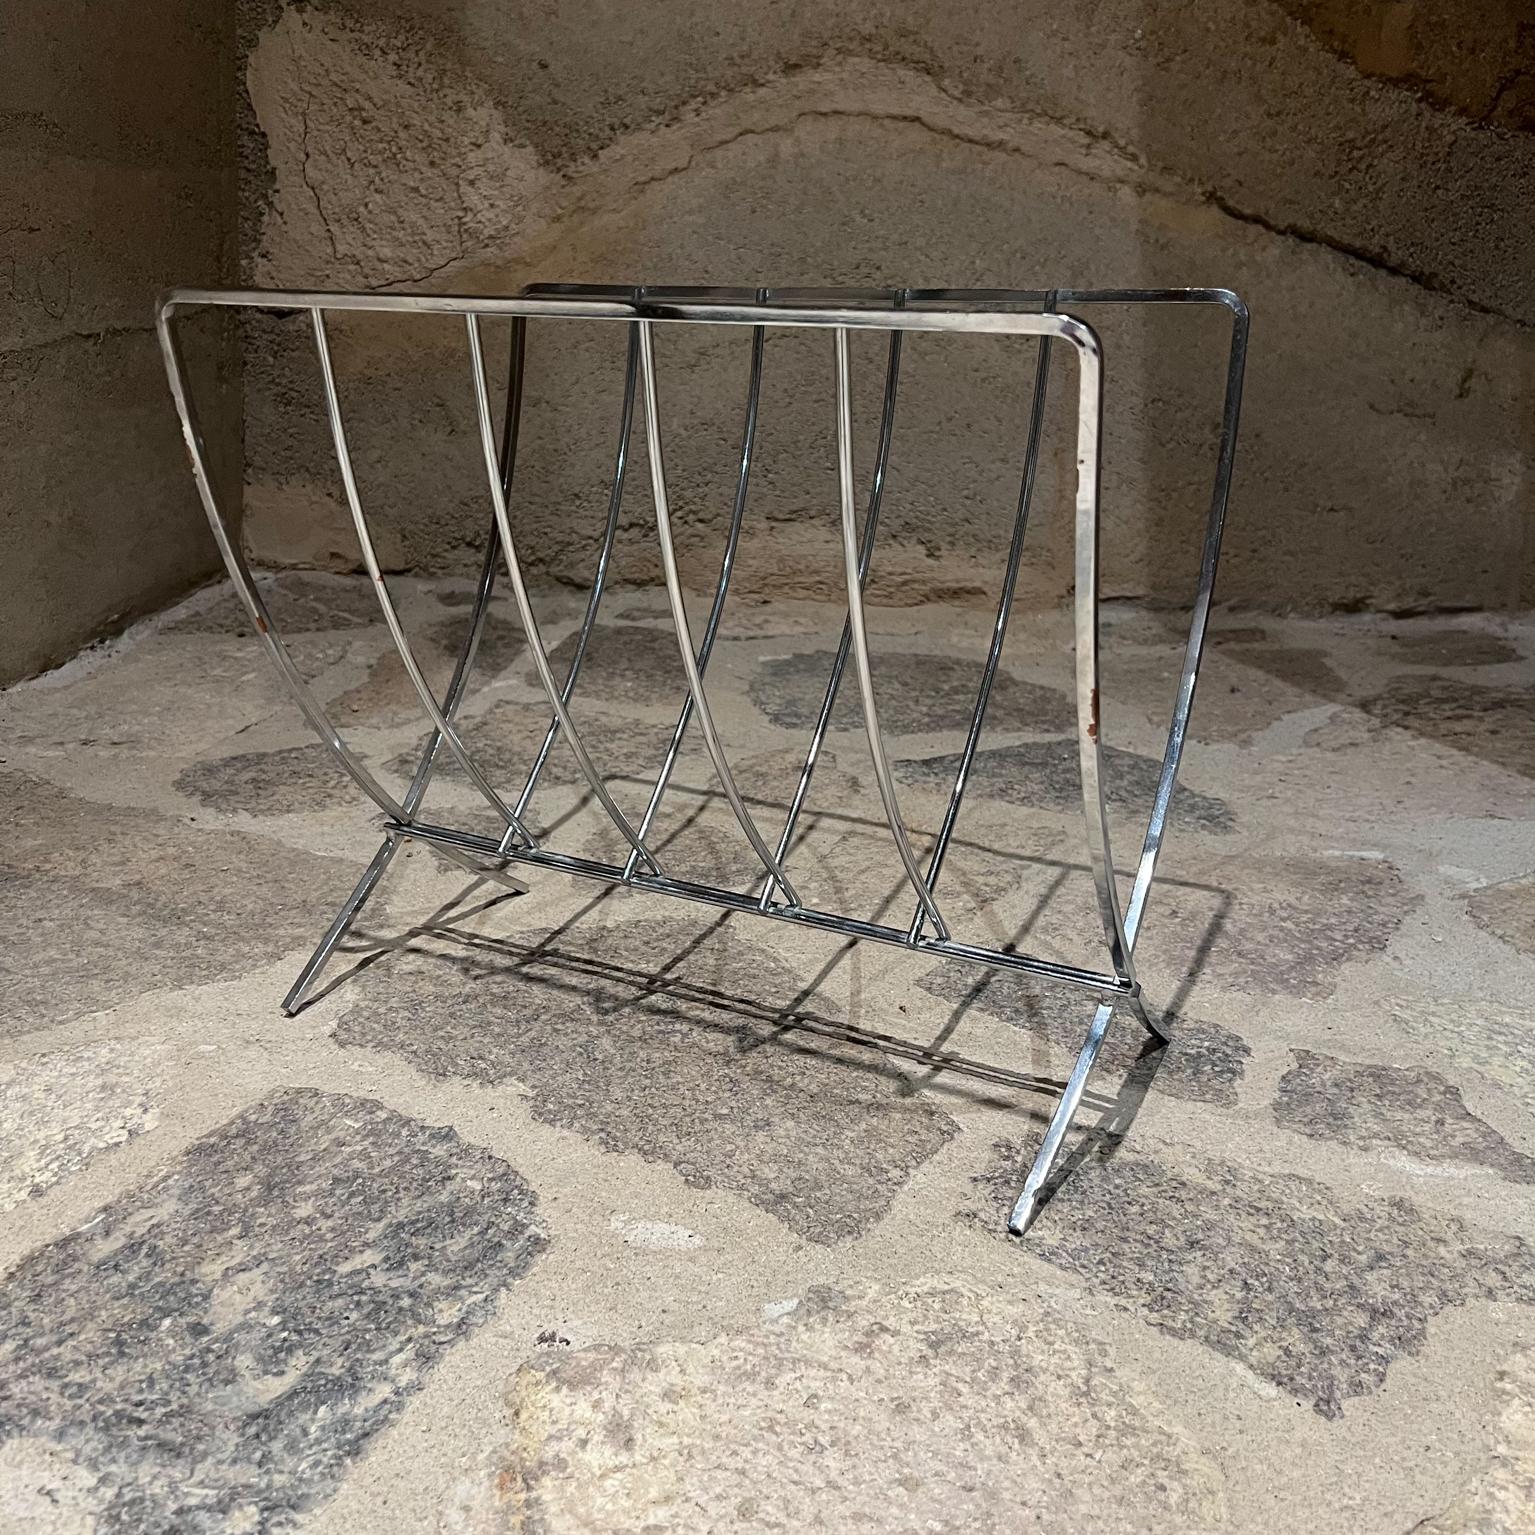 1980s Mid-Century Modern Streamlined Chrome Magazine Rack Foldable
Clean modern lines. Chrome plated finish.
No stamp present from maker.
13.25 h x 15.25 w x 10 d and Folded 16 x 3.25
Some areas have pitting on the chrome.
Preowned unrestored